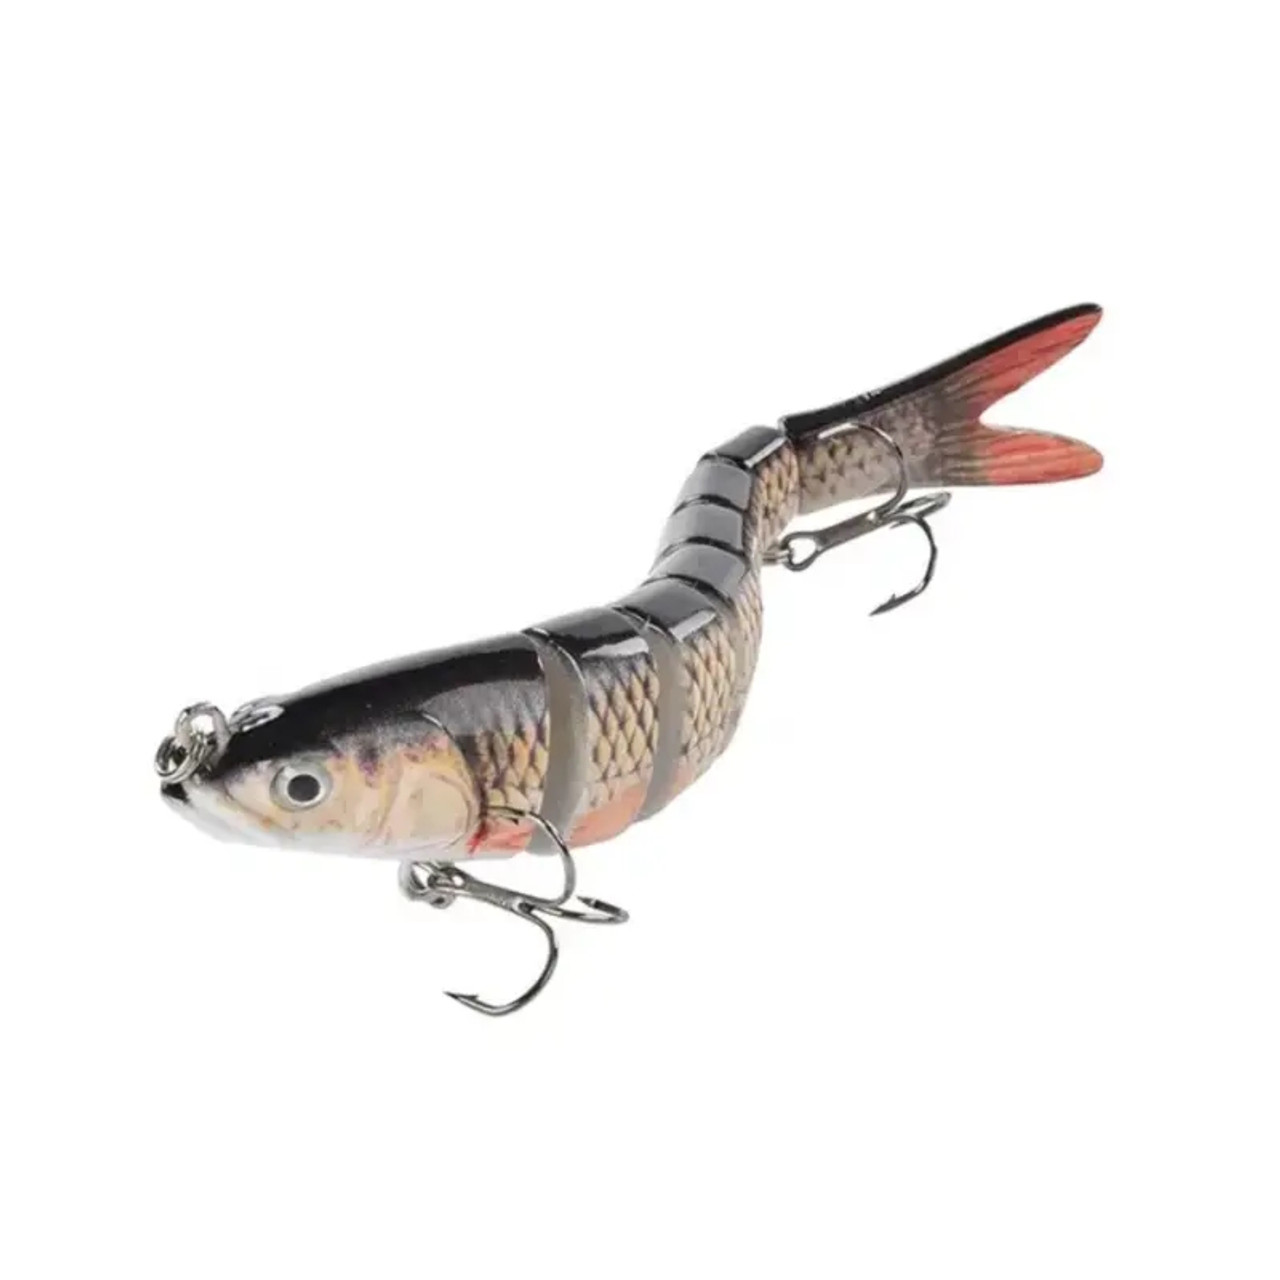 Plastic Lures Swimbaits With Hooks Multi-jointed Fishing Lure For